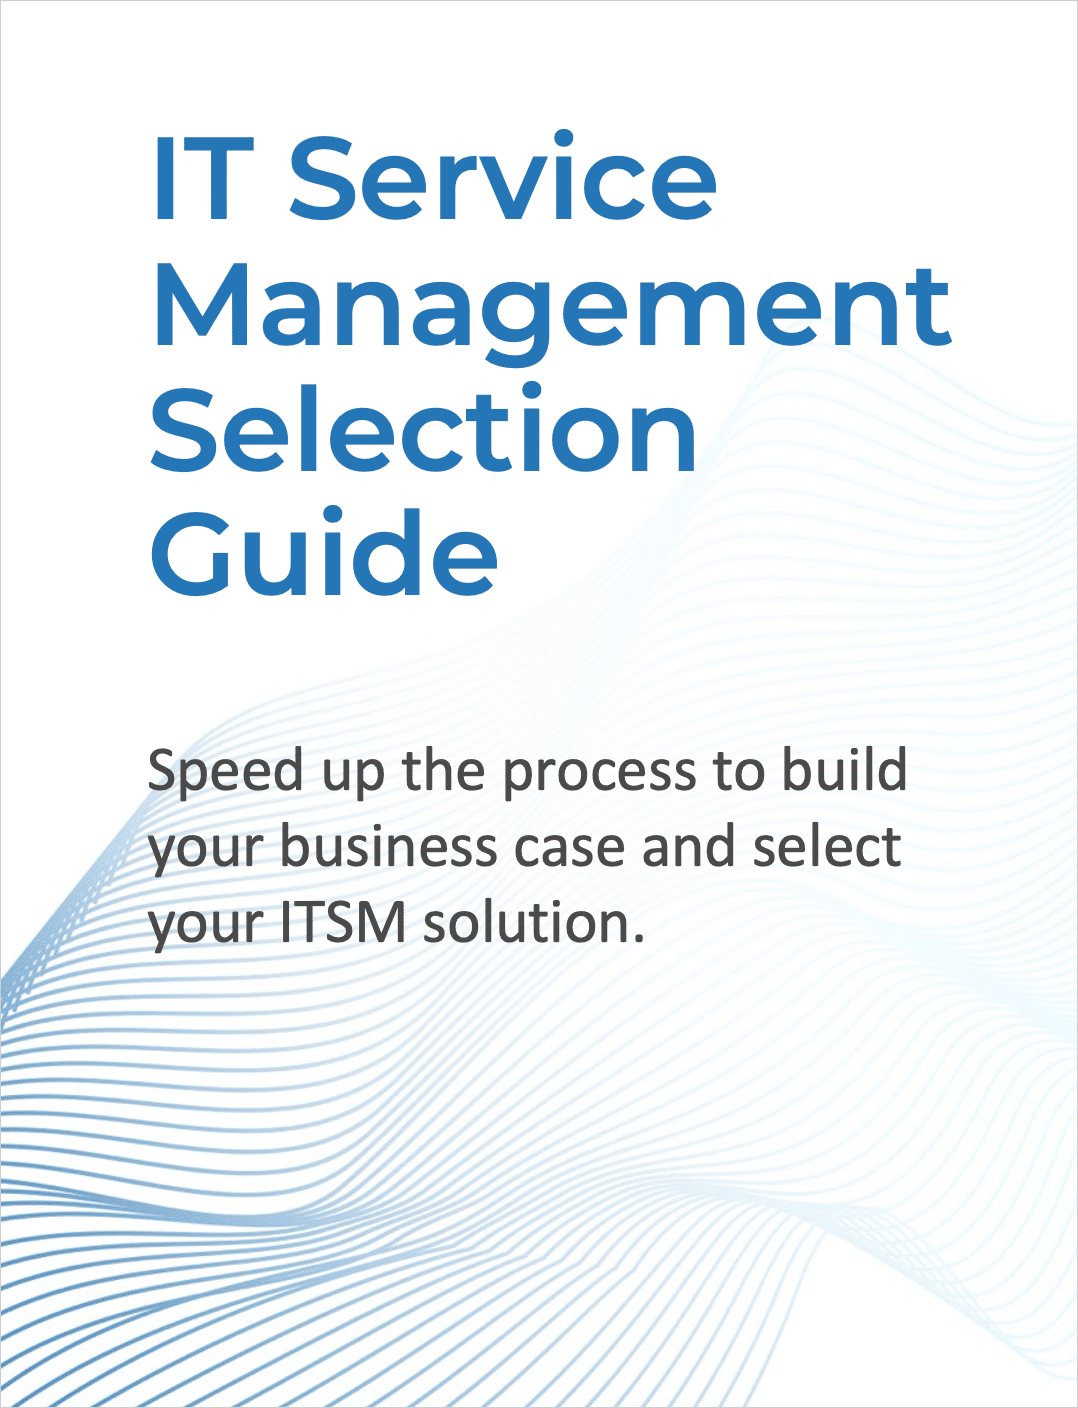 IT-Service-Management-Selection-Guide-cover-border